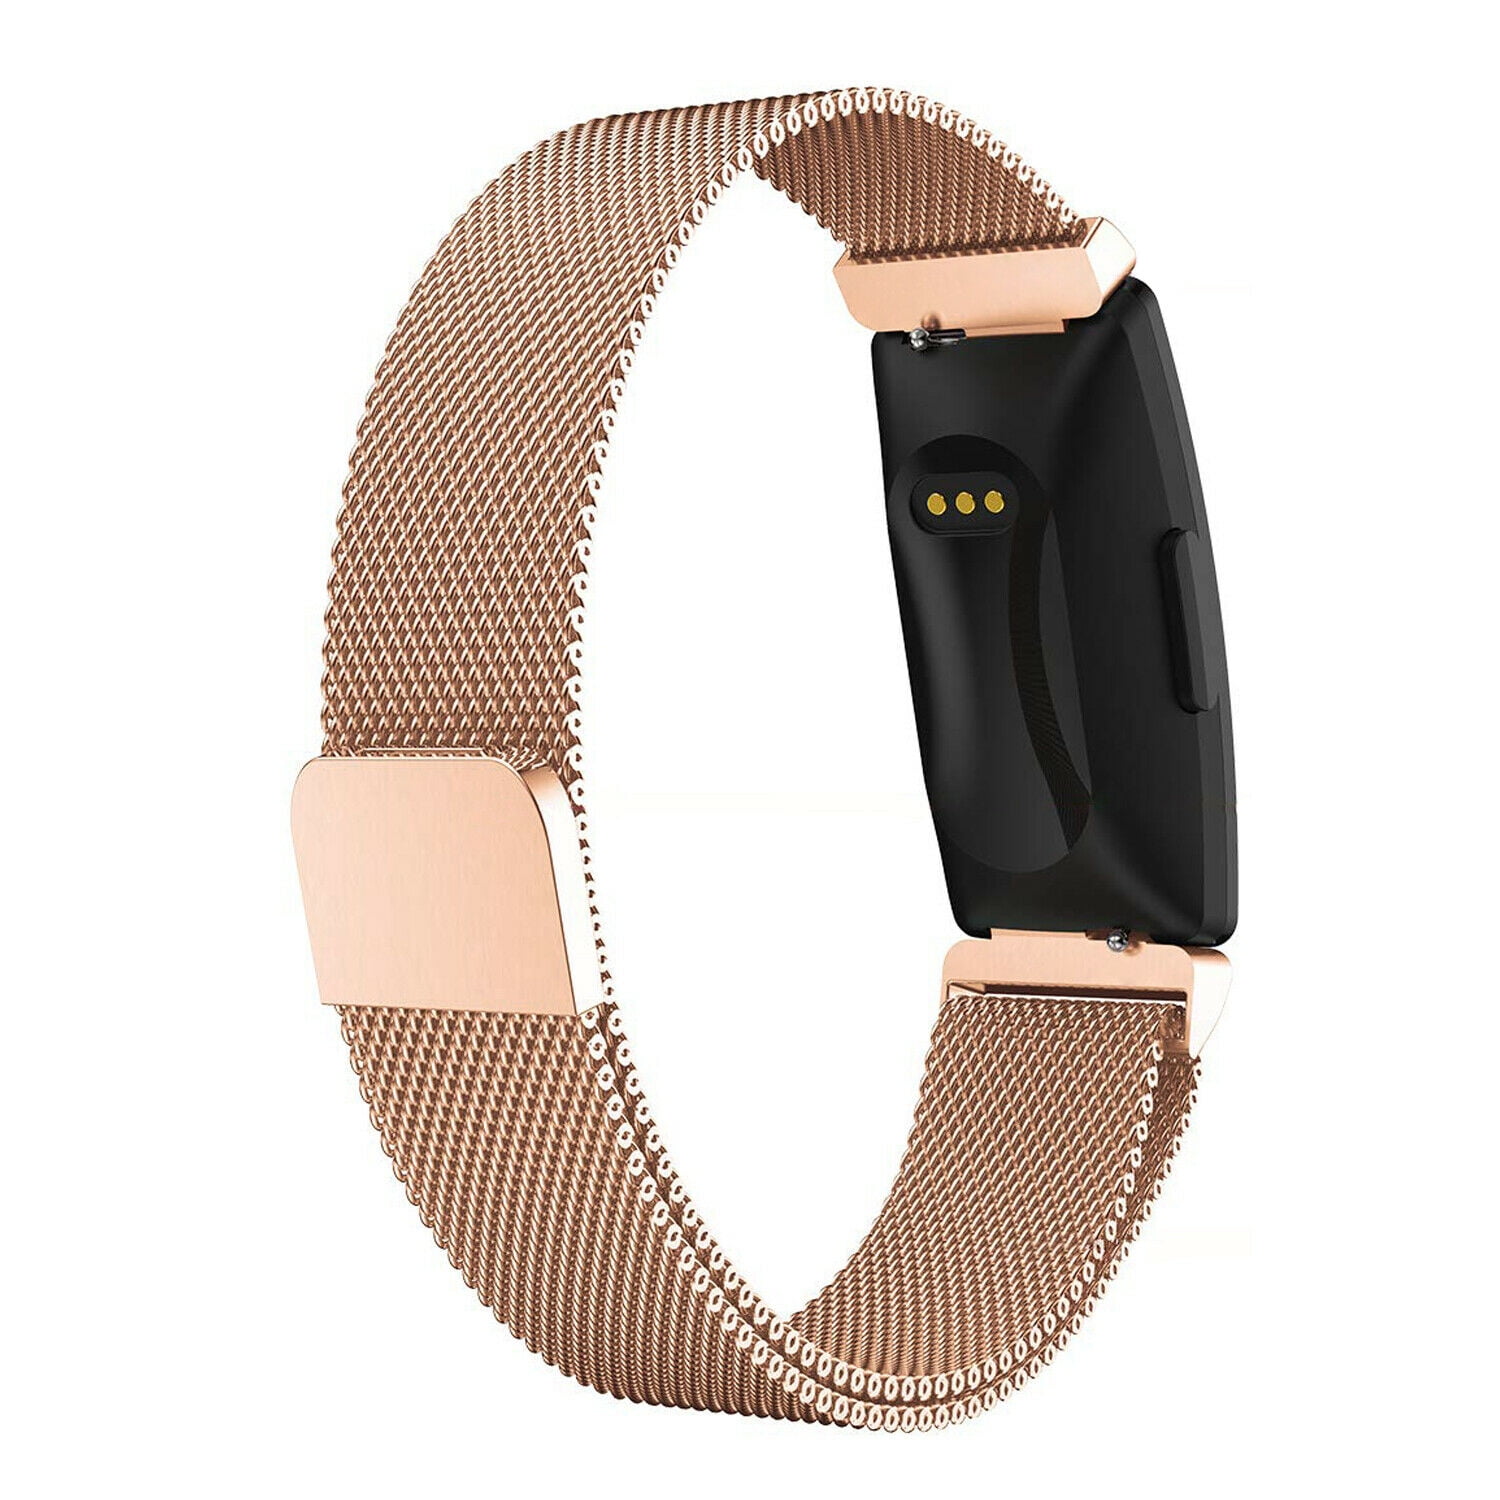 Leather Fitbit Inspire 2 Band Gold Fitbit Inspire 2 Bracelet Genuine  Vintage Brown Leather Strap Fitbit Inspire 2 Wristband Jewelry 